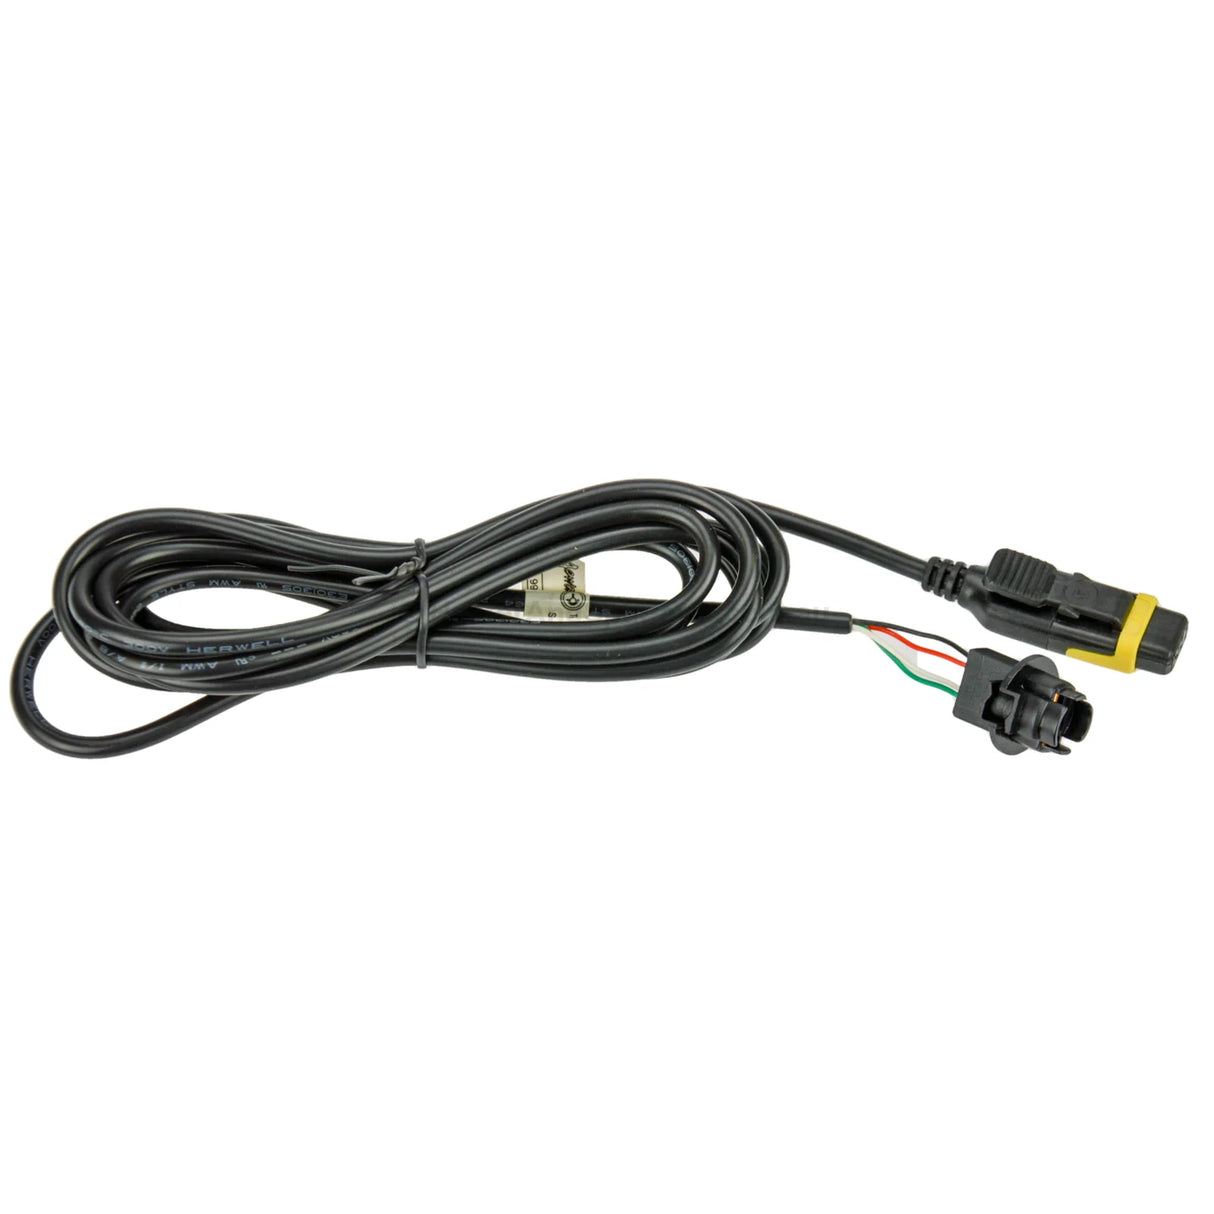 AEWARE in.link Light Cable - with Lamp Holder - Plug Lead - Heater and Spa Parts